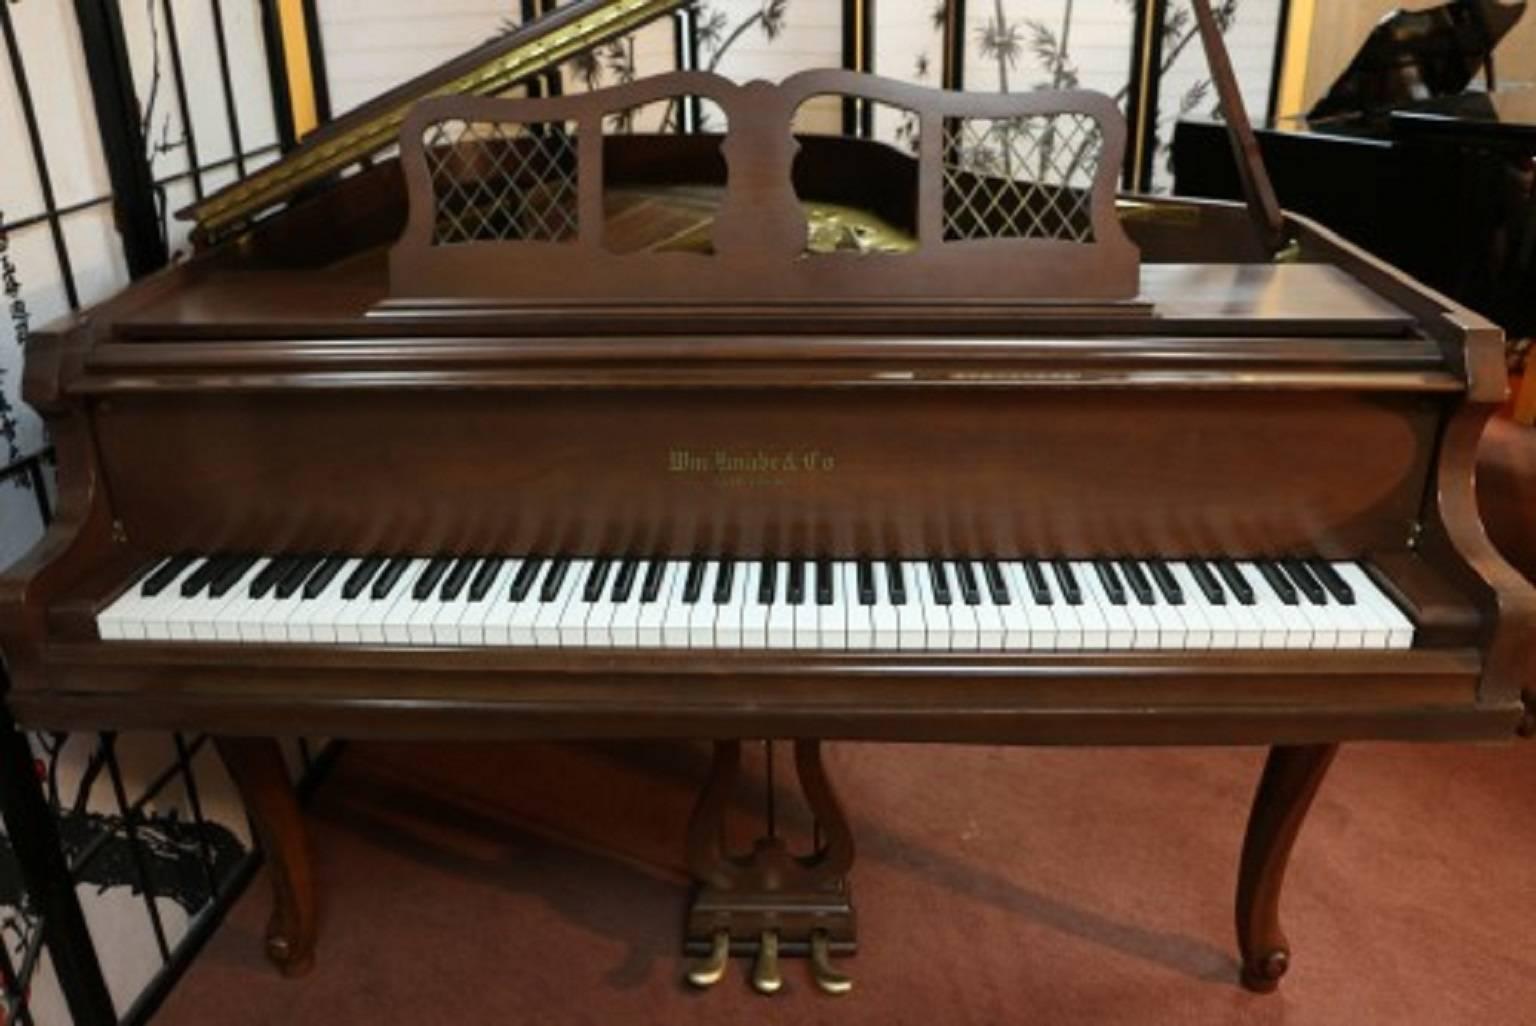 See Sonny's Video Tour of this Piano upon request.

Hear and see Sonny play this incredible sounding Steinway Chinoiserie masterpiece on the video at the bottom of Sonny's Luxury Art Case Piano's storefront homepage. 

Pristine, excellent